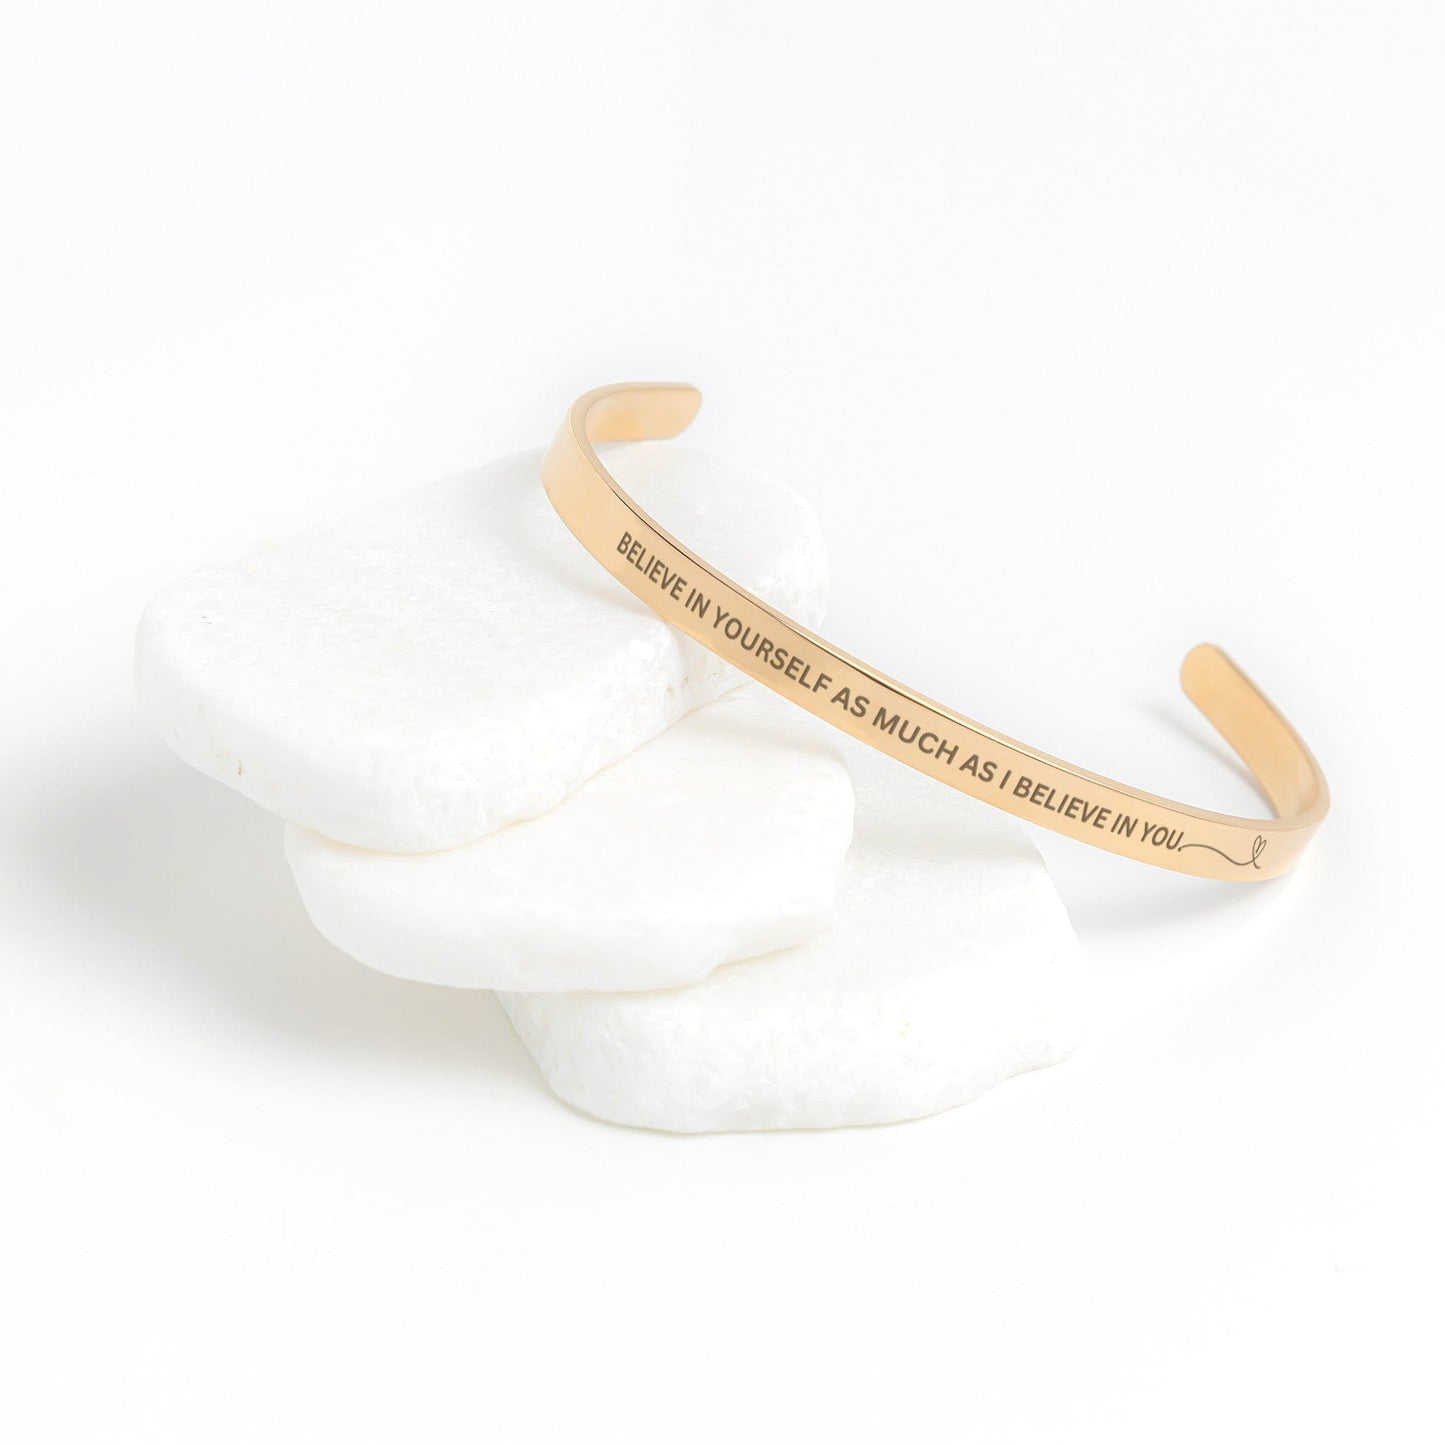 Jewelry "Whenever your crown gets heavy, remember whose daughter you are" - Cuff Bracelet - SS489